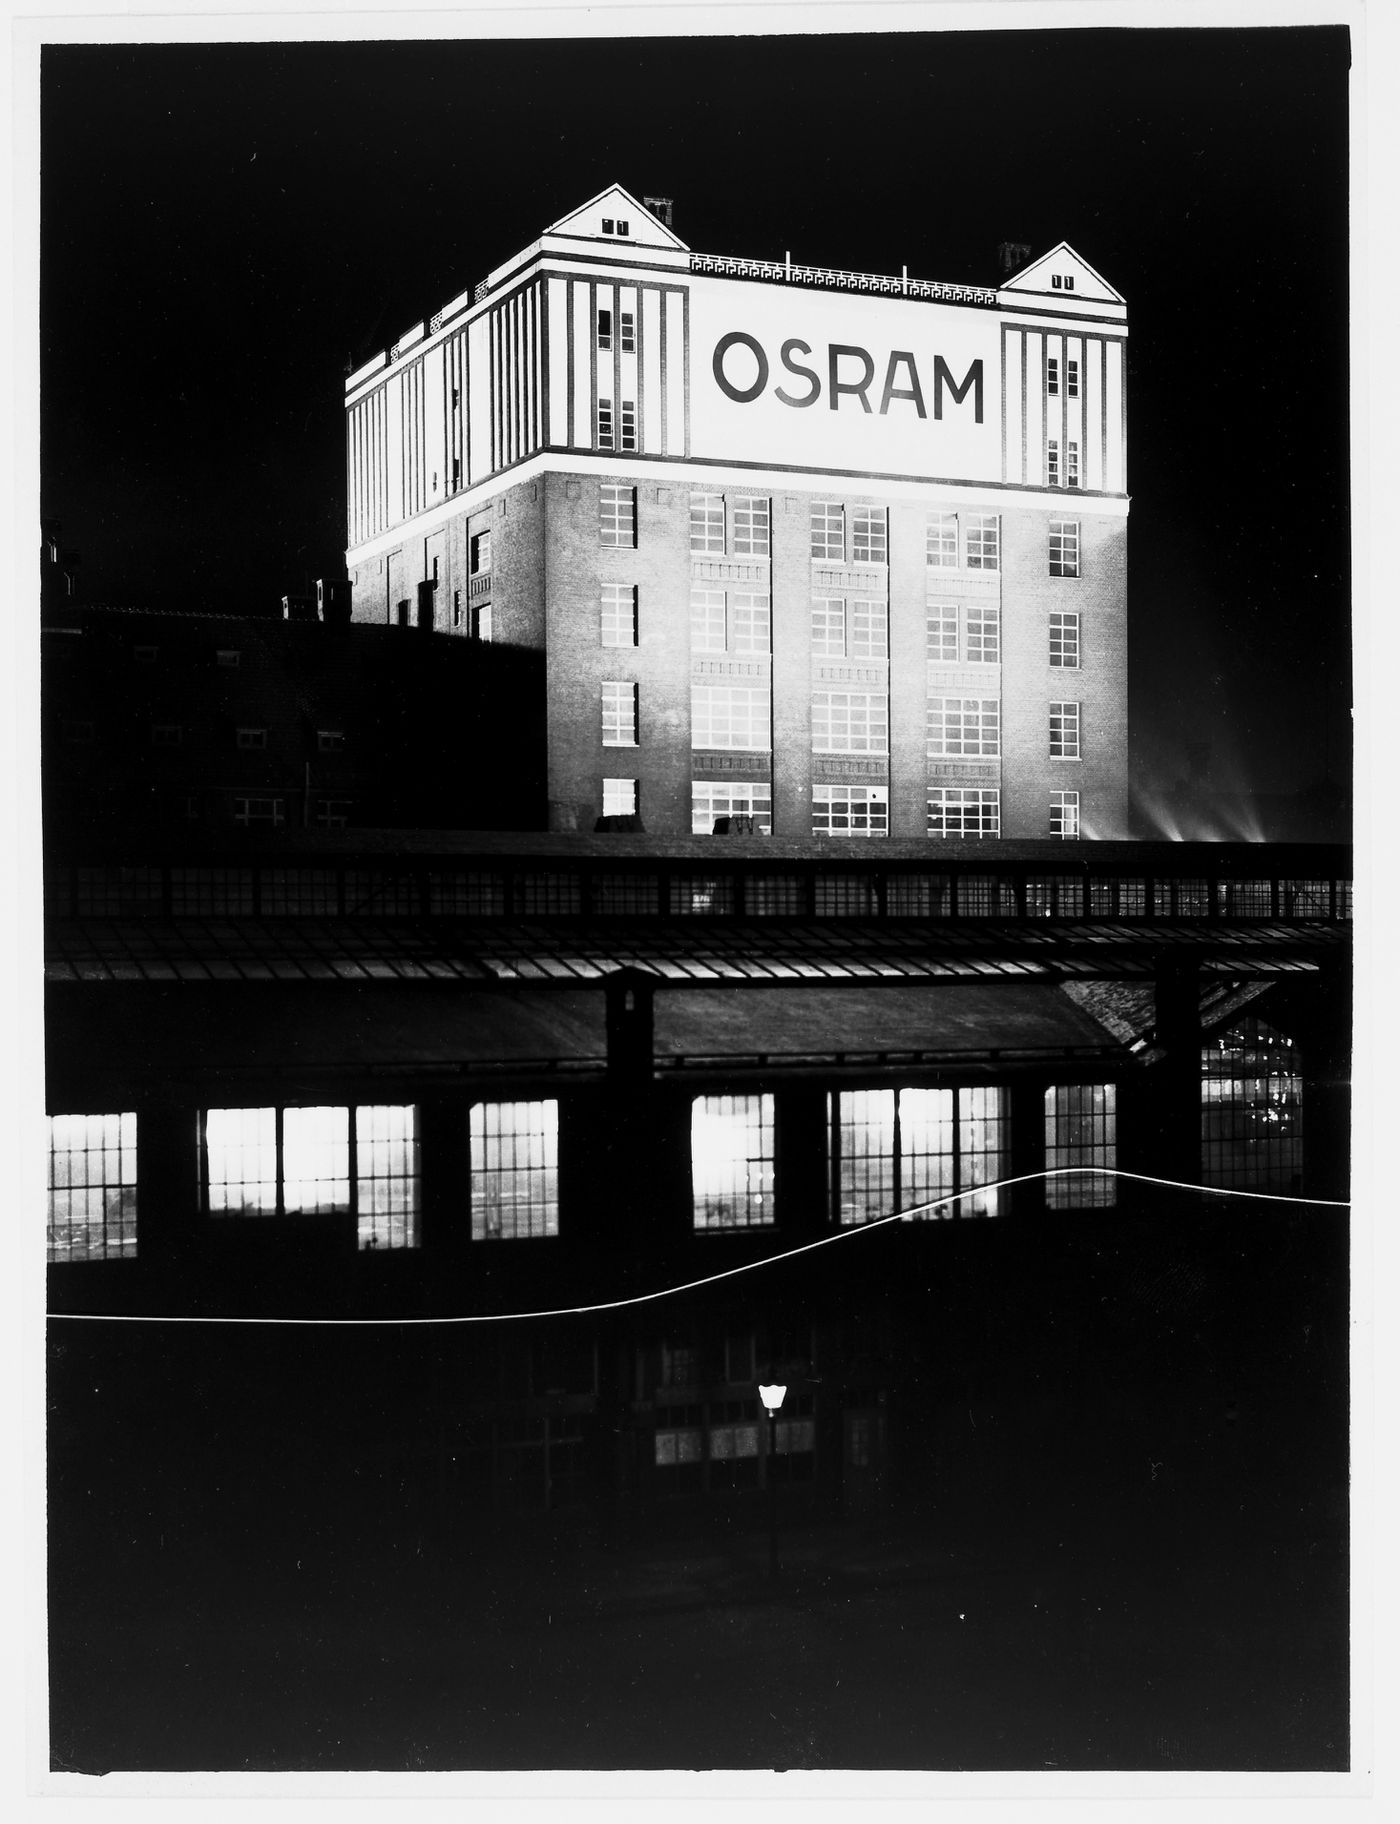 Night view of illuminated Osram building on Rotherstrasse, Berlin, Germany